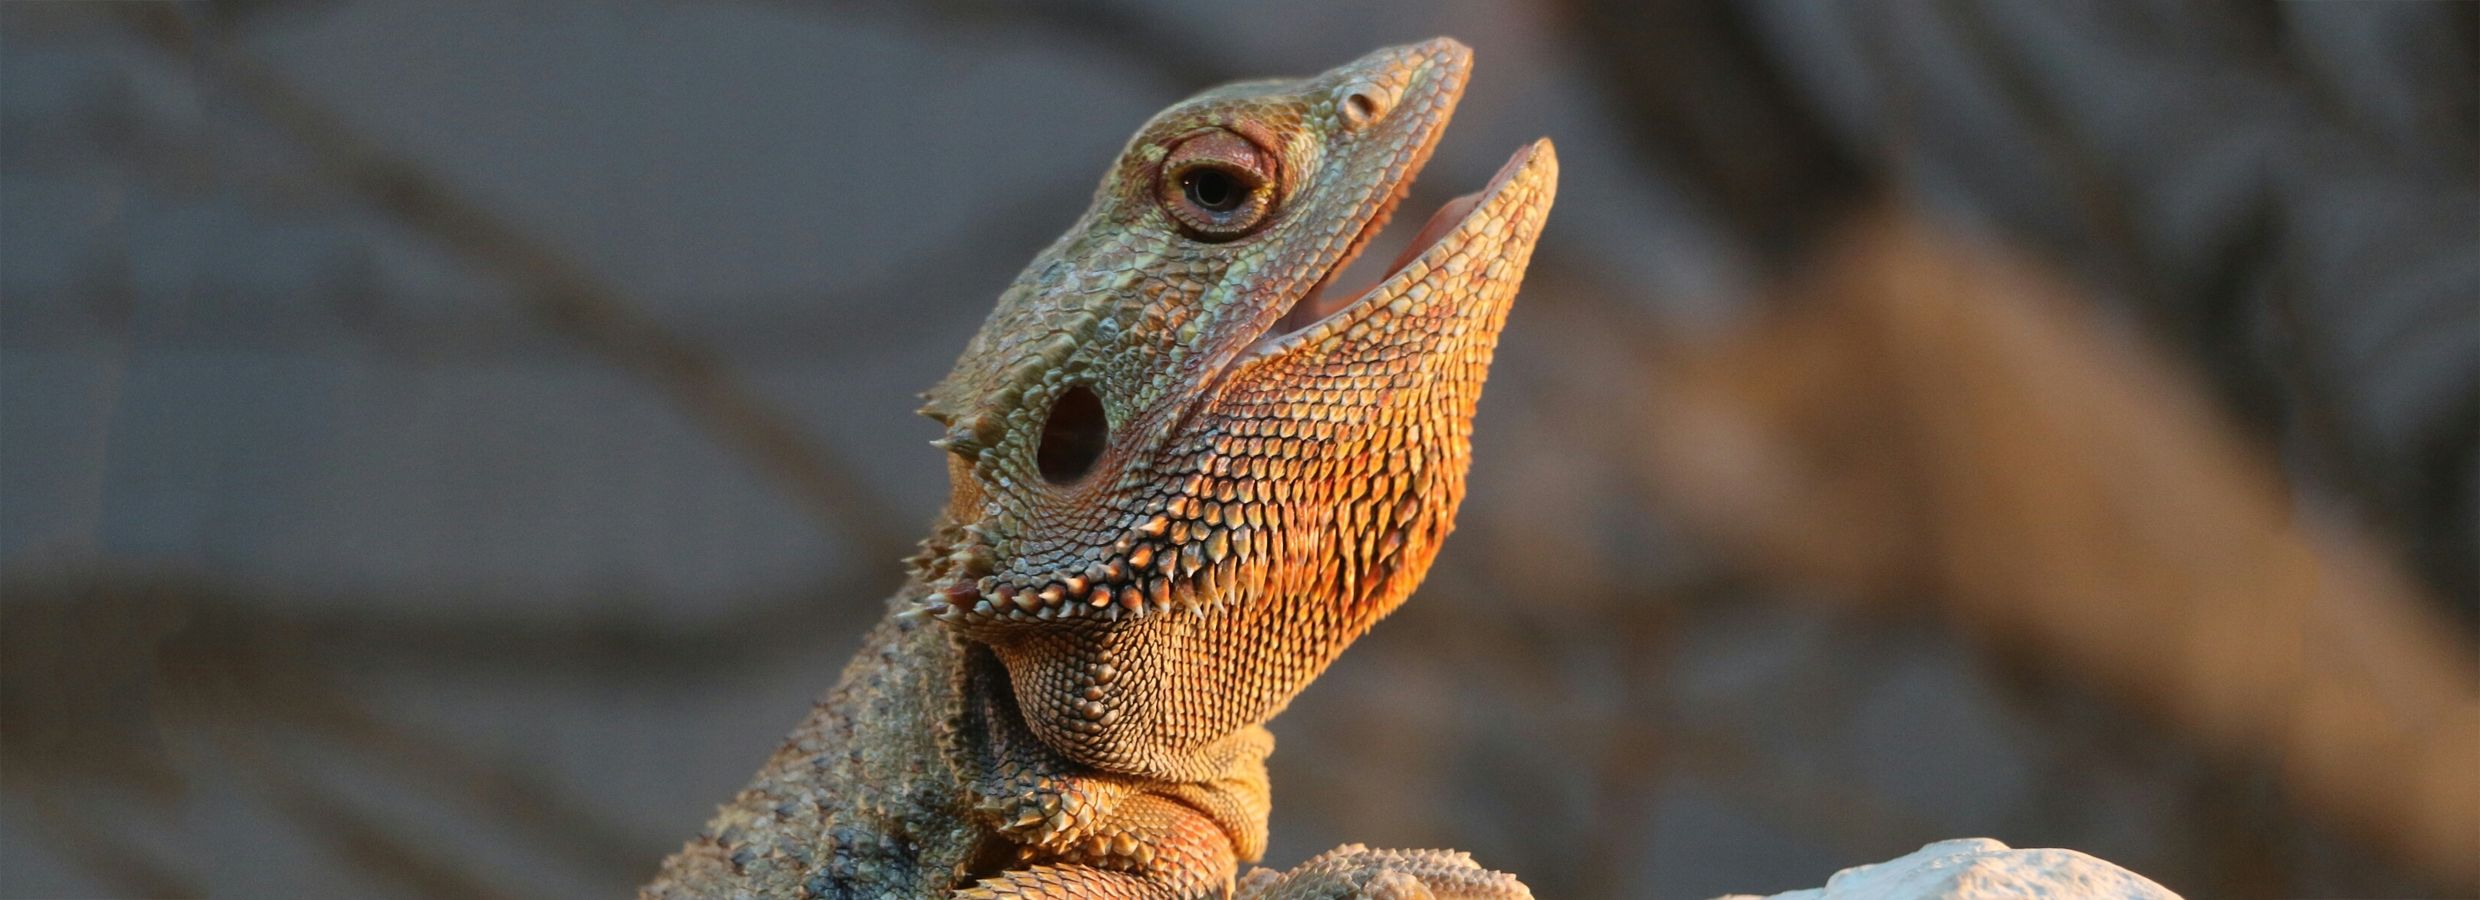 7-Step Bearded Dragon Care Guide - PetHelpful